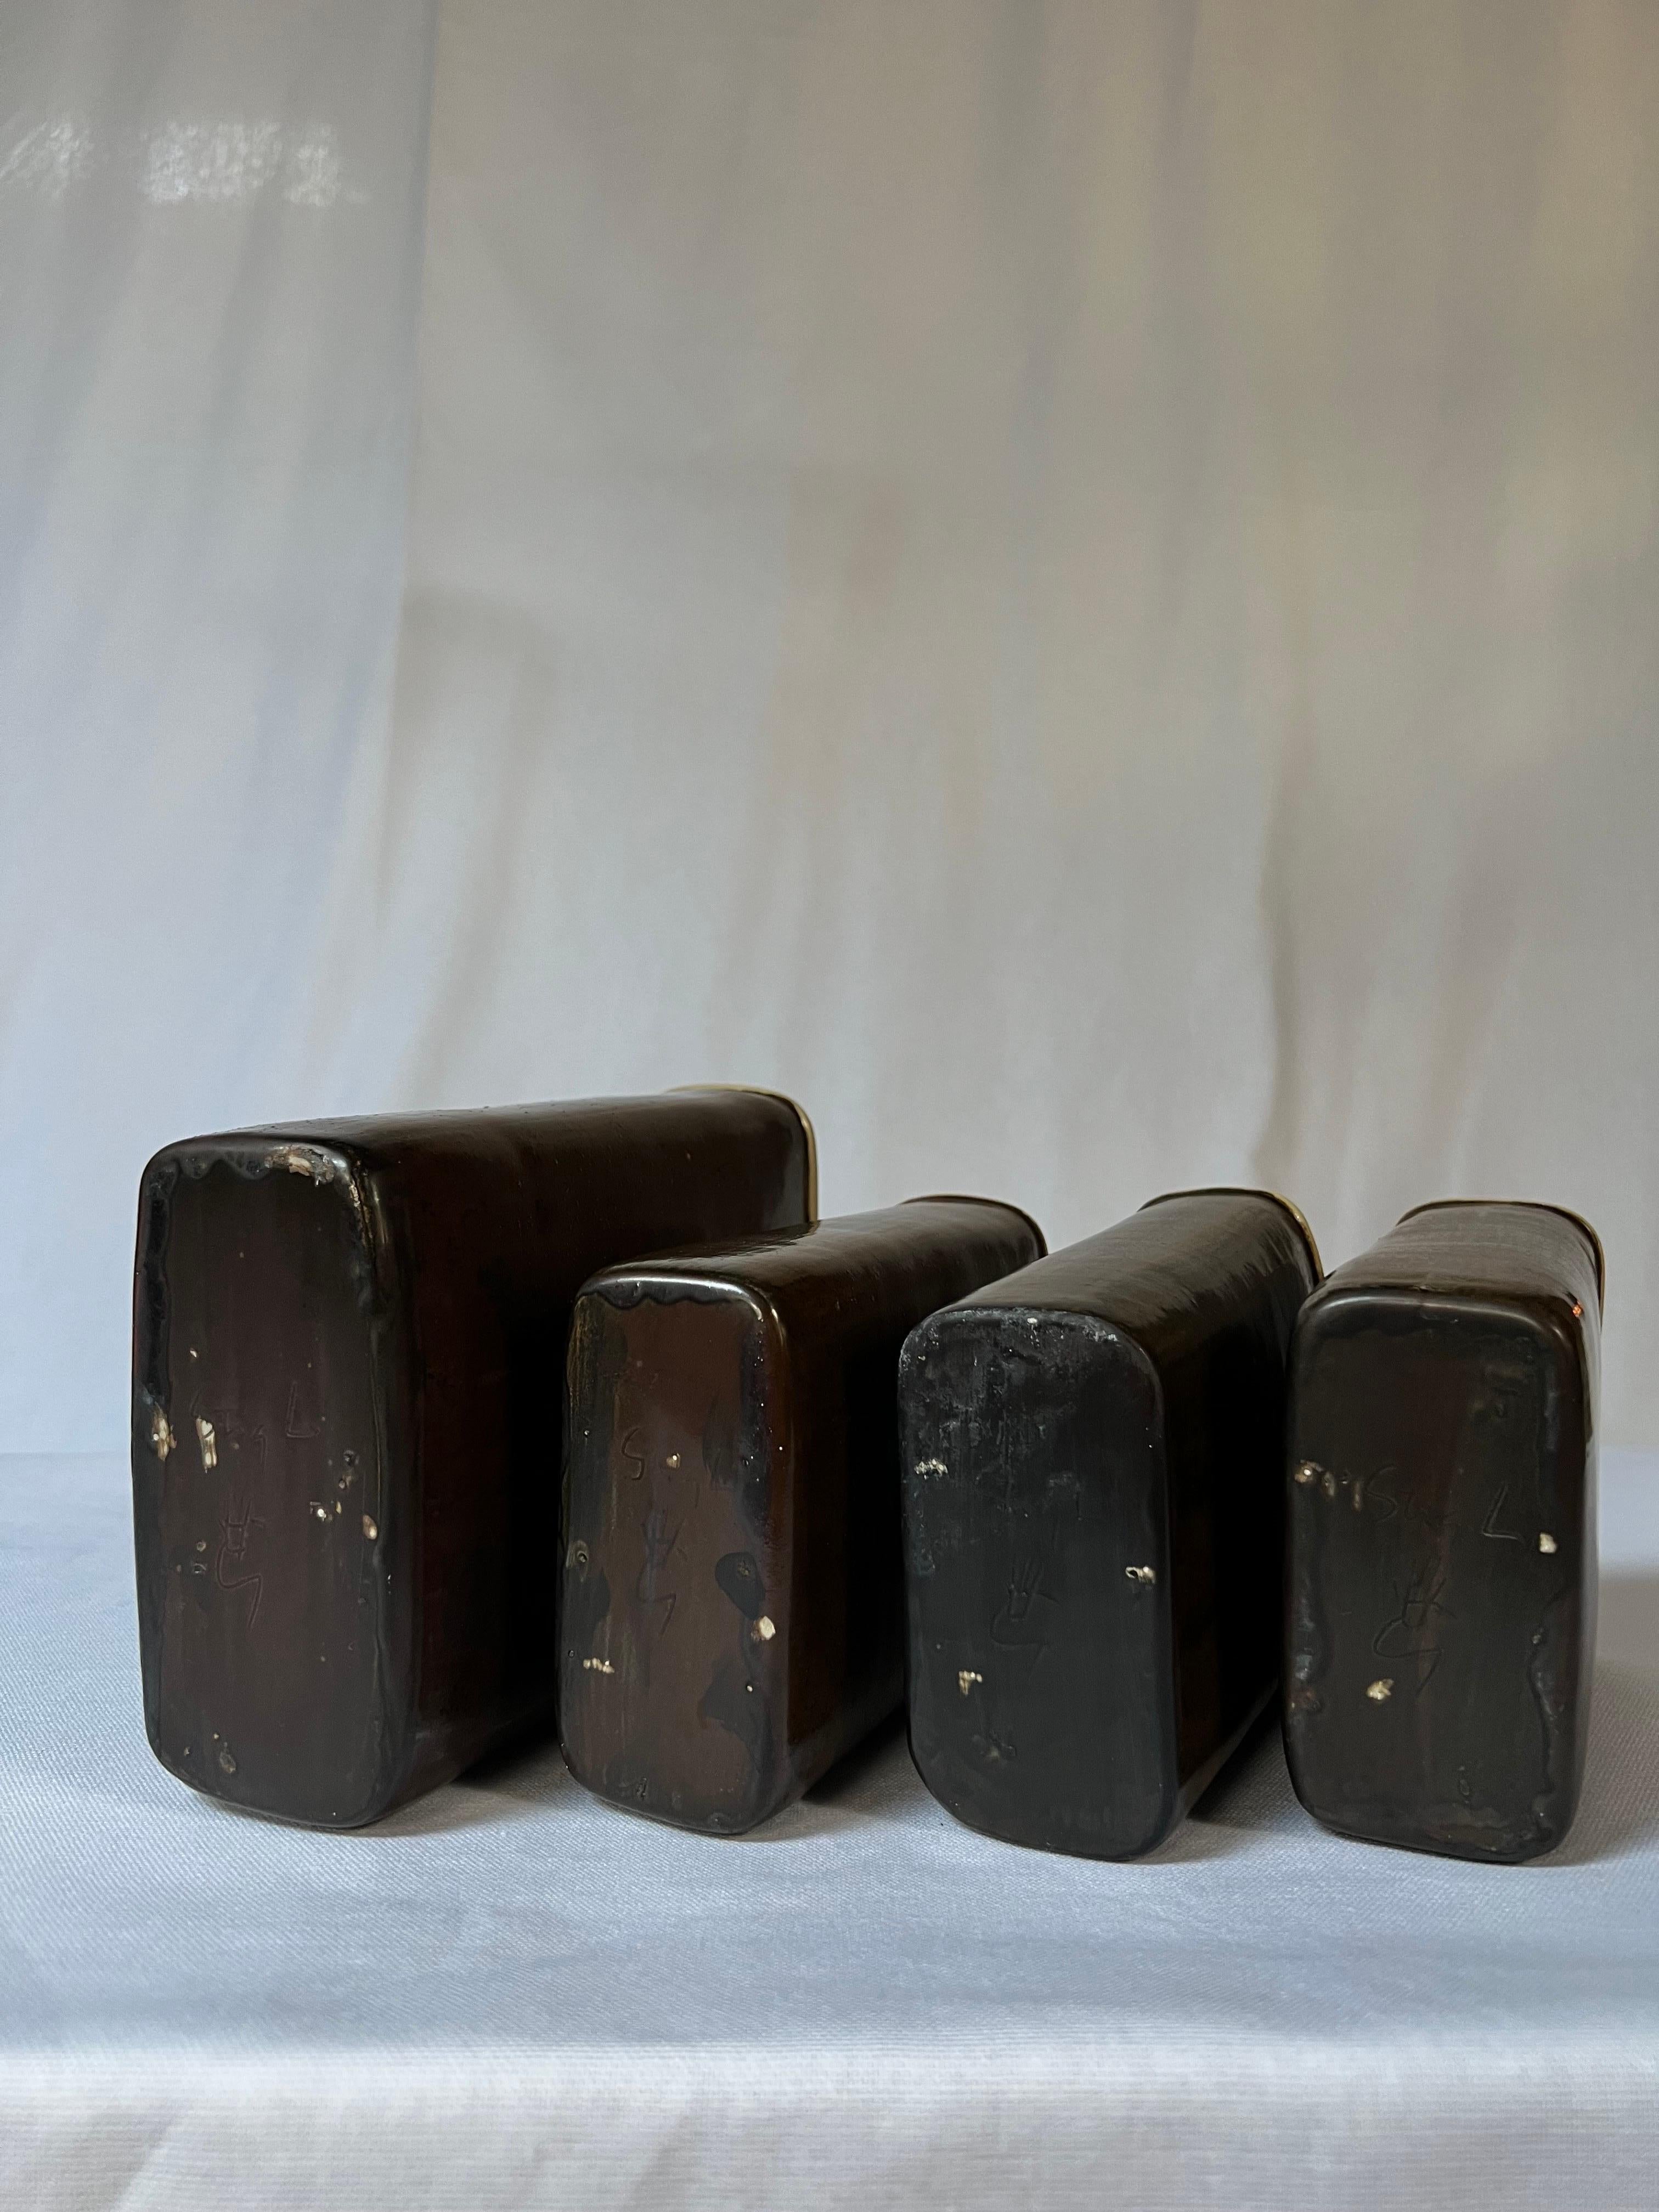 Mid-20th Century Stig Lindberg Set of 4 Unique Ceramics in Brown Glazed Made by Hand Sweden 60s For Sale